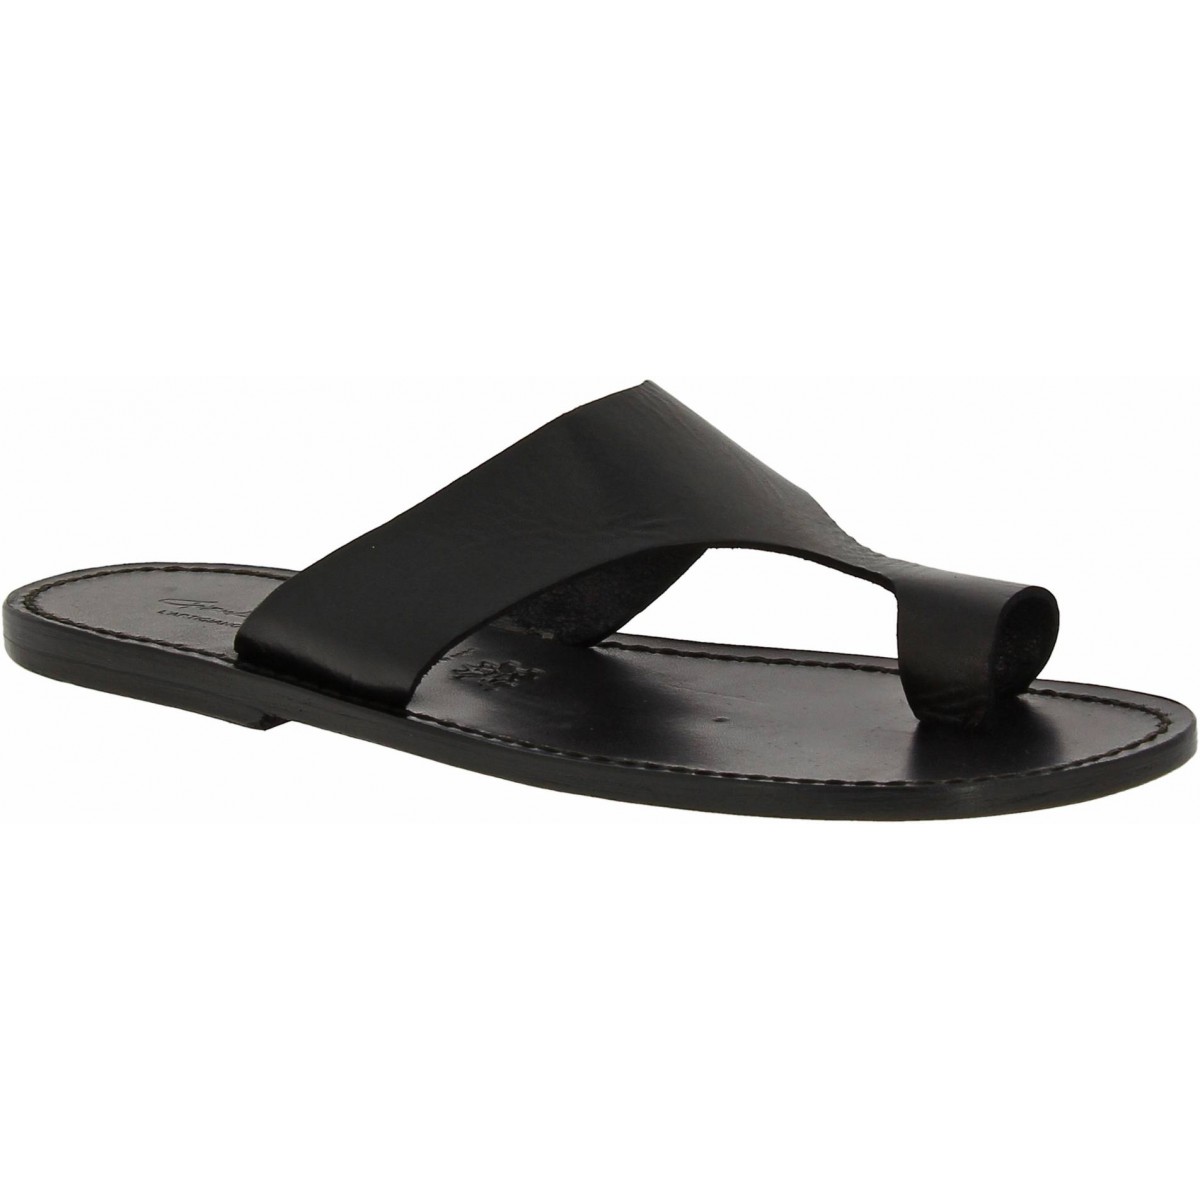 Black leather thong sandals for men Handmade in Italy | The leather ...